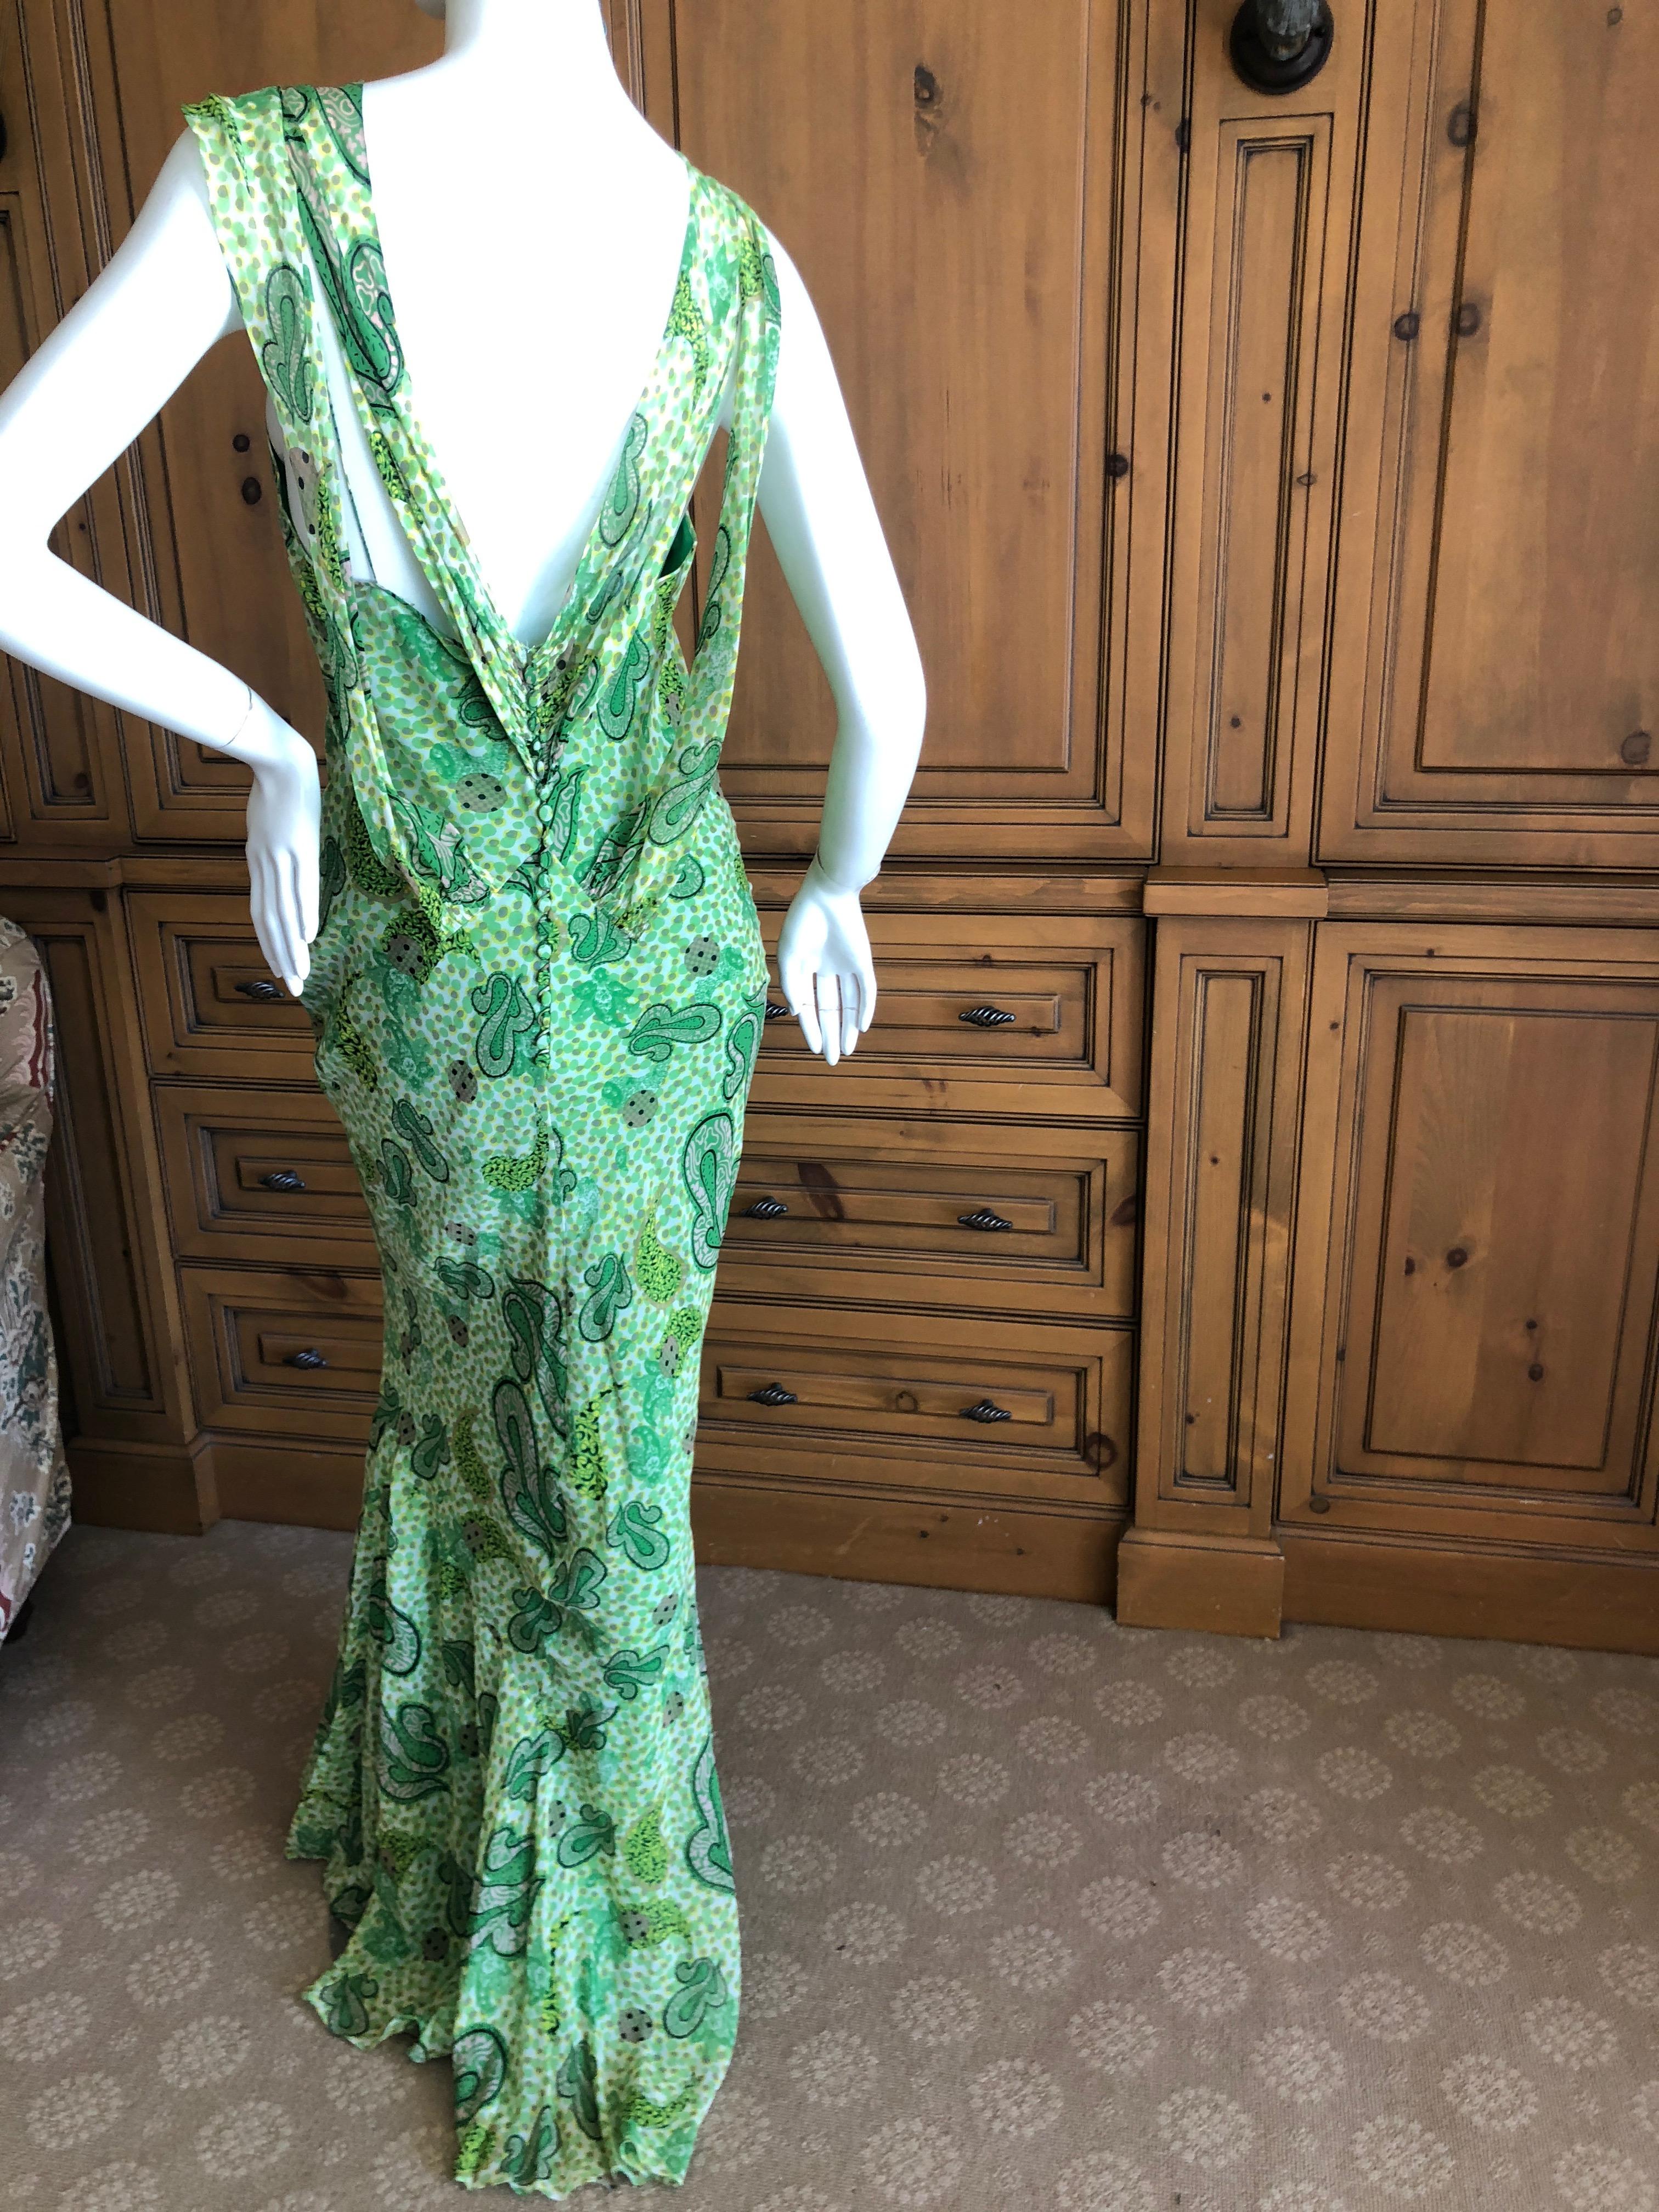  John Galliano 2002 Green Silk Paisley Ruffled Evening Dress with Low Cowl Back For Sale 2